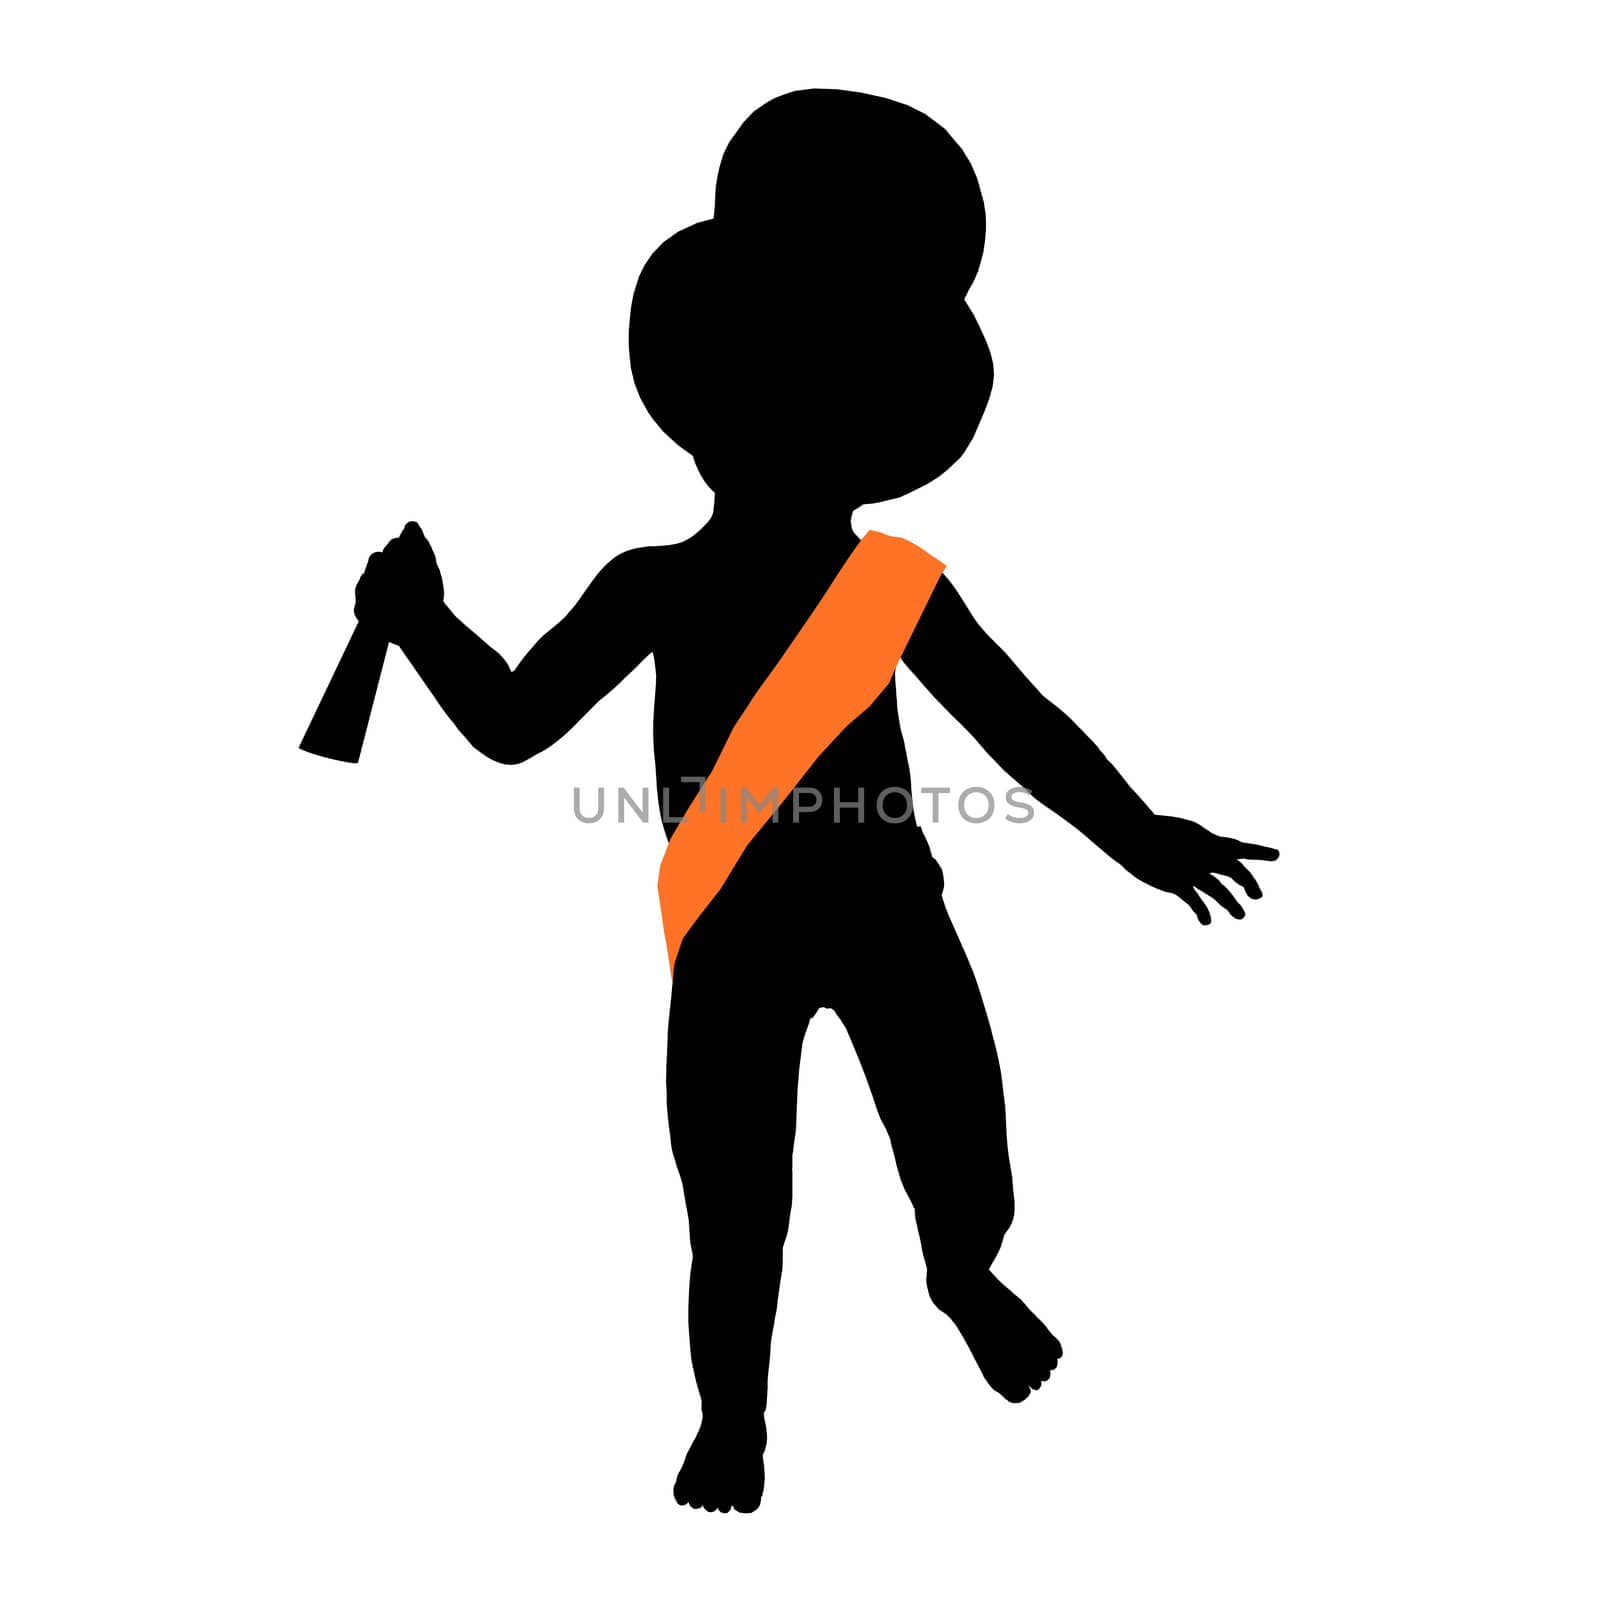 New Years Illustration Silhouette by kathygold